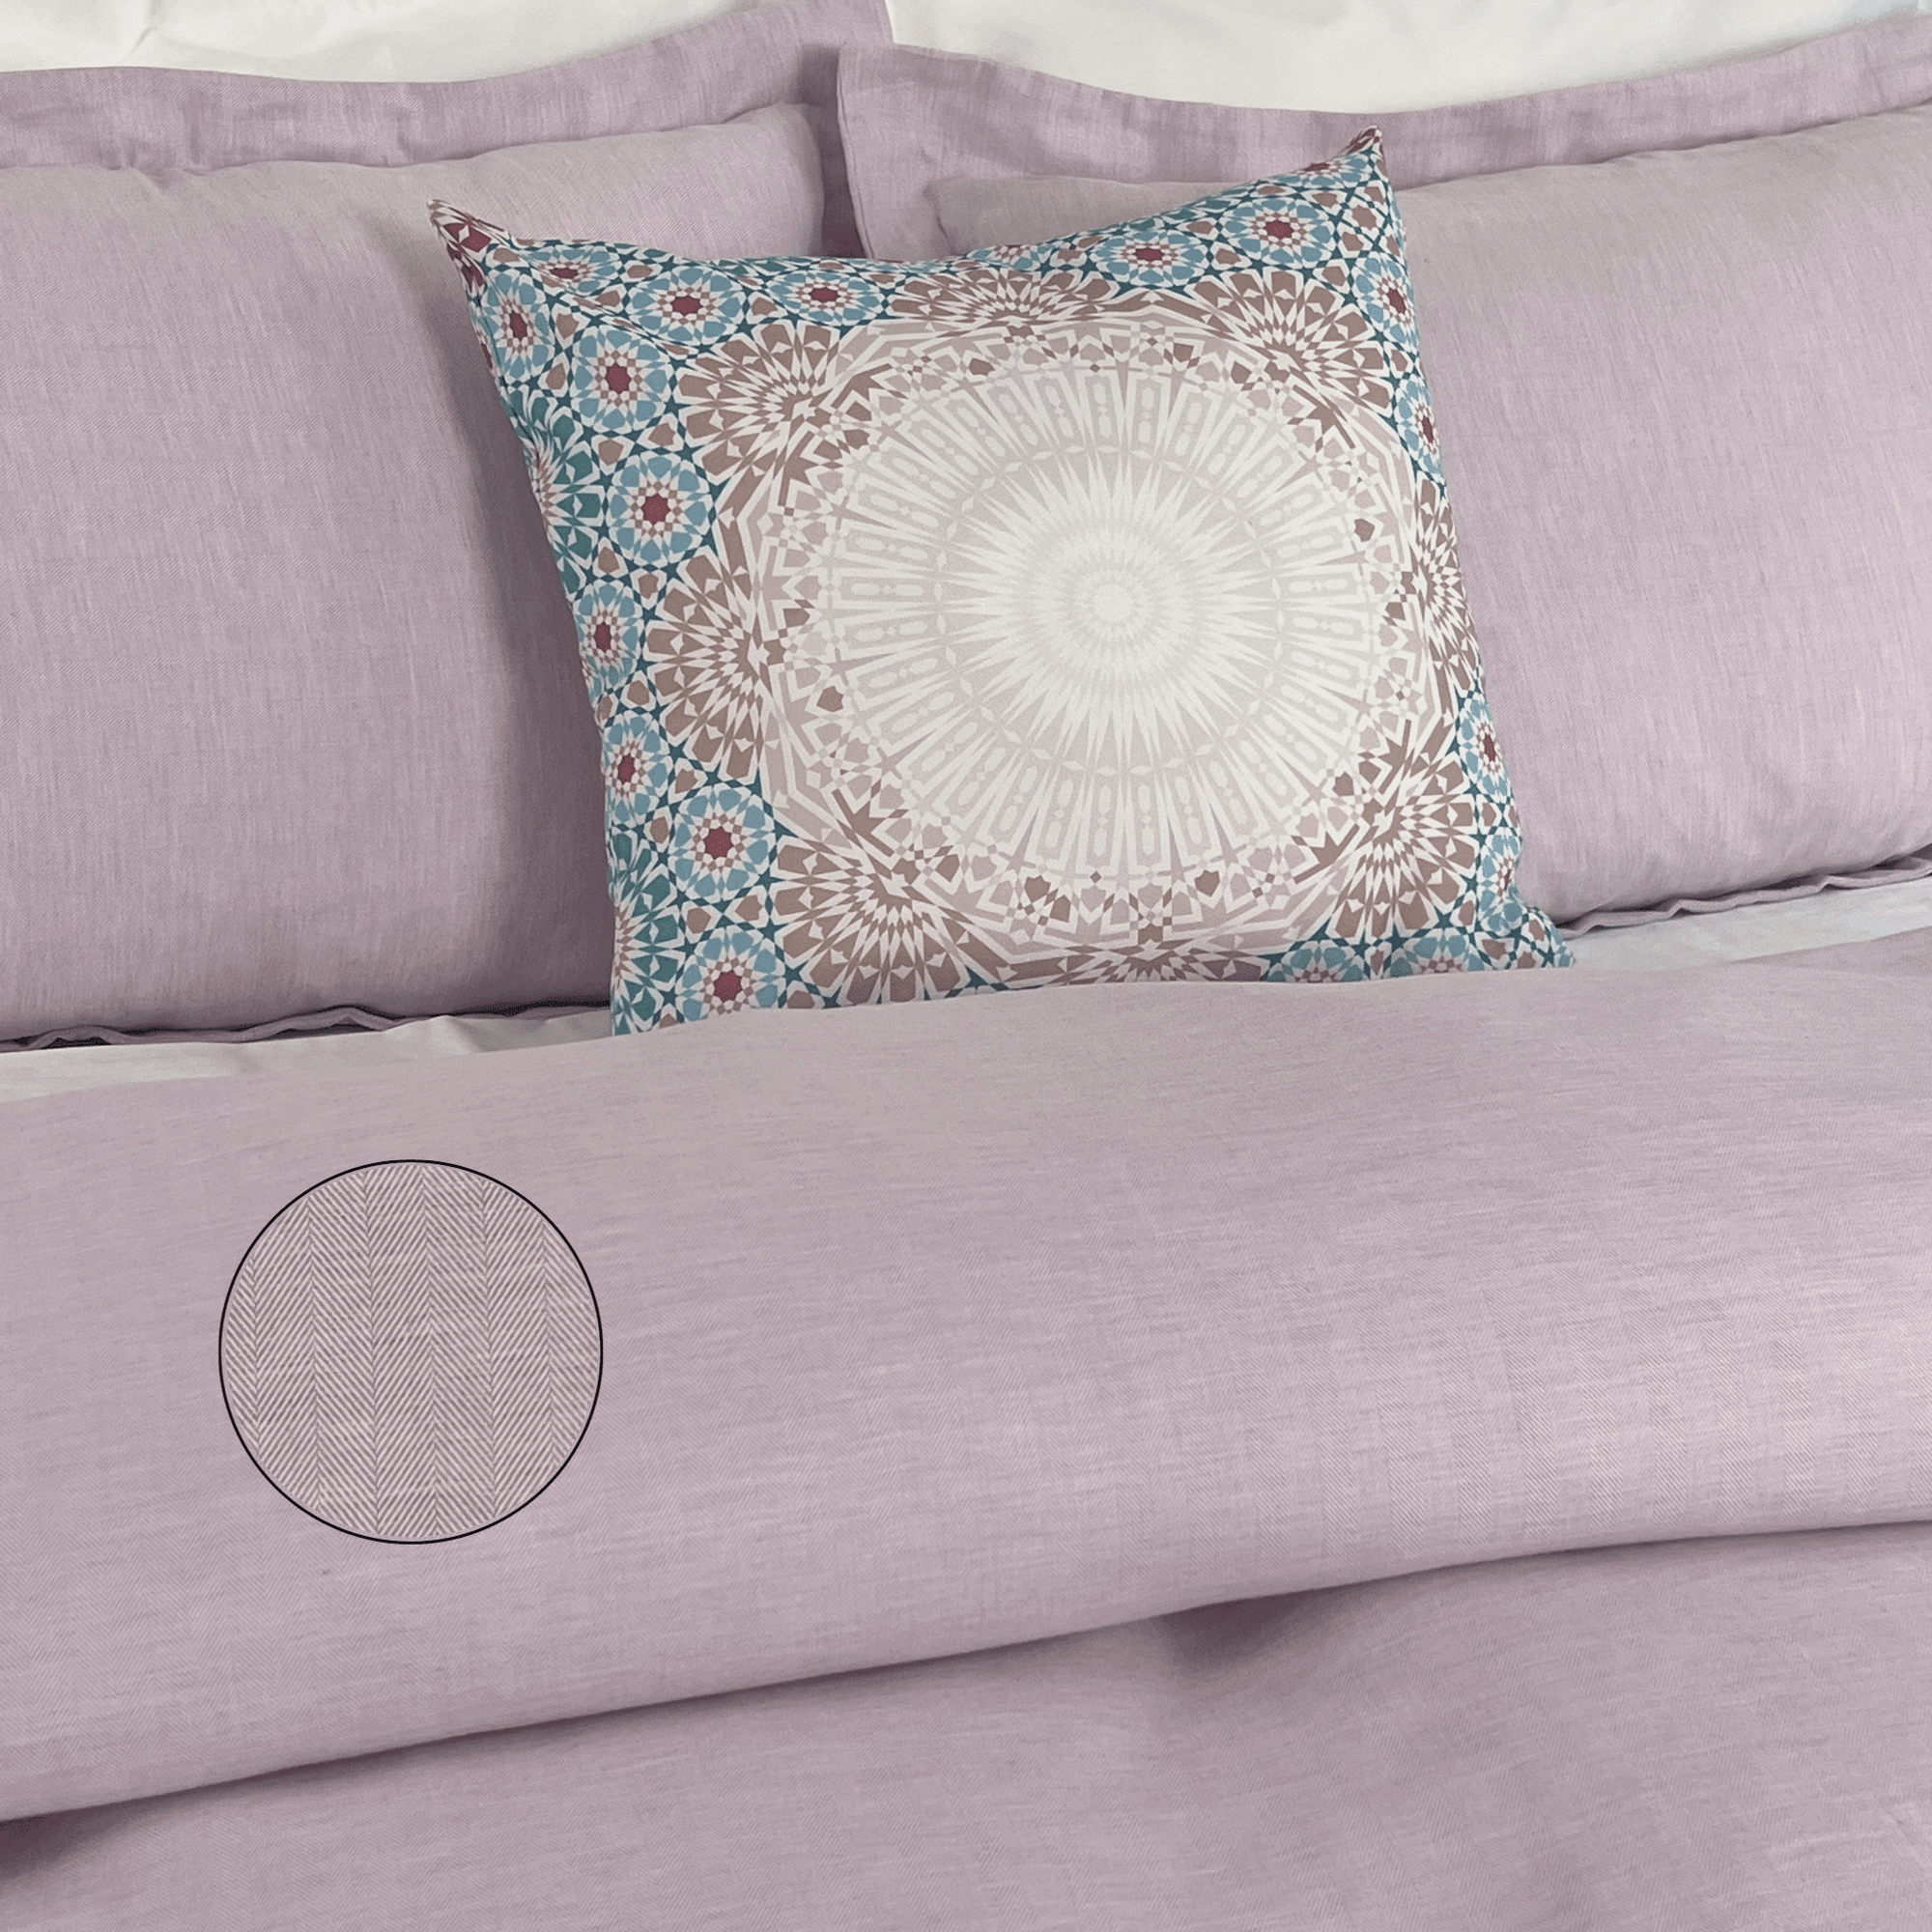 beddley Pink Easy-Change™ Duvet Cover - Herringbone with three sided open easycare zipper